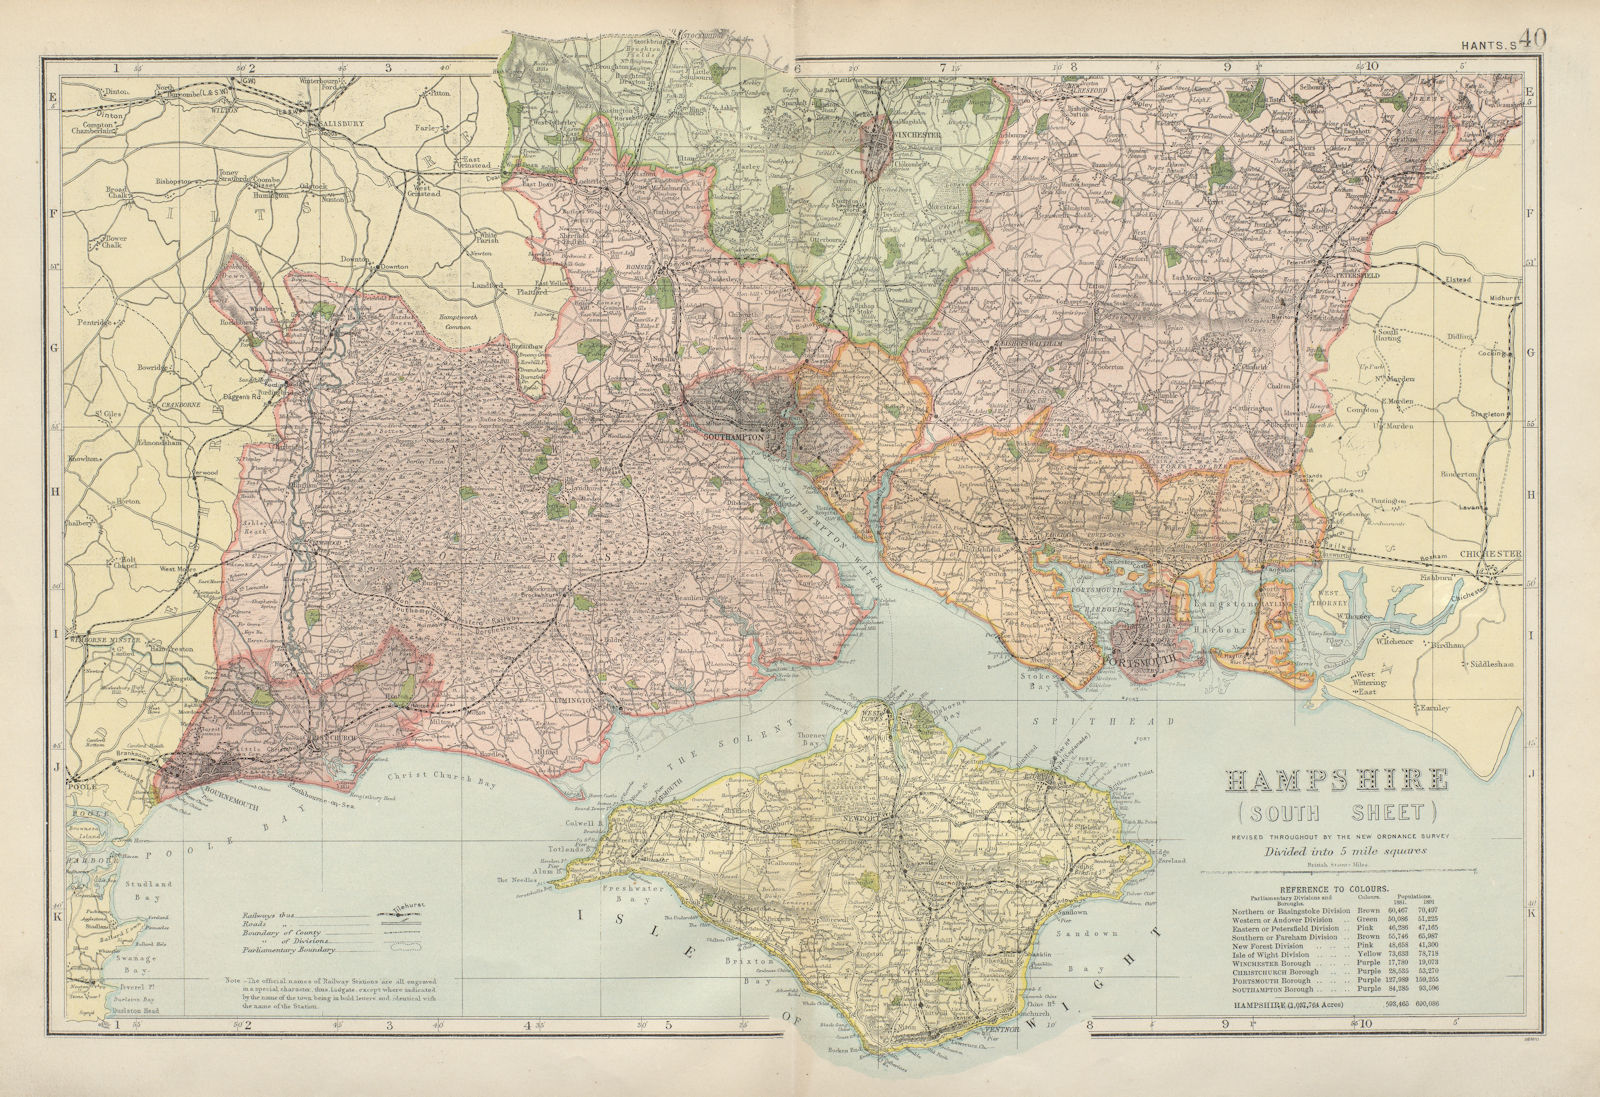 HAMPSHIRE SOUTH. Isle of Wight. Parliamentary  boroughs.Railways.BACON 1900 map